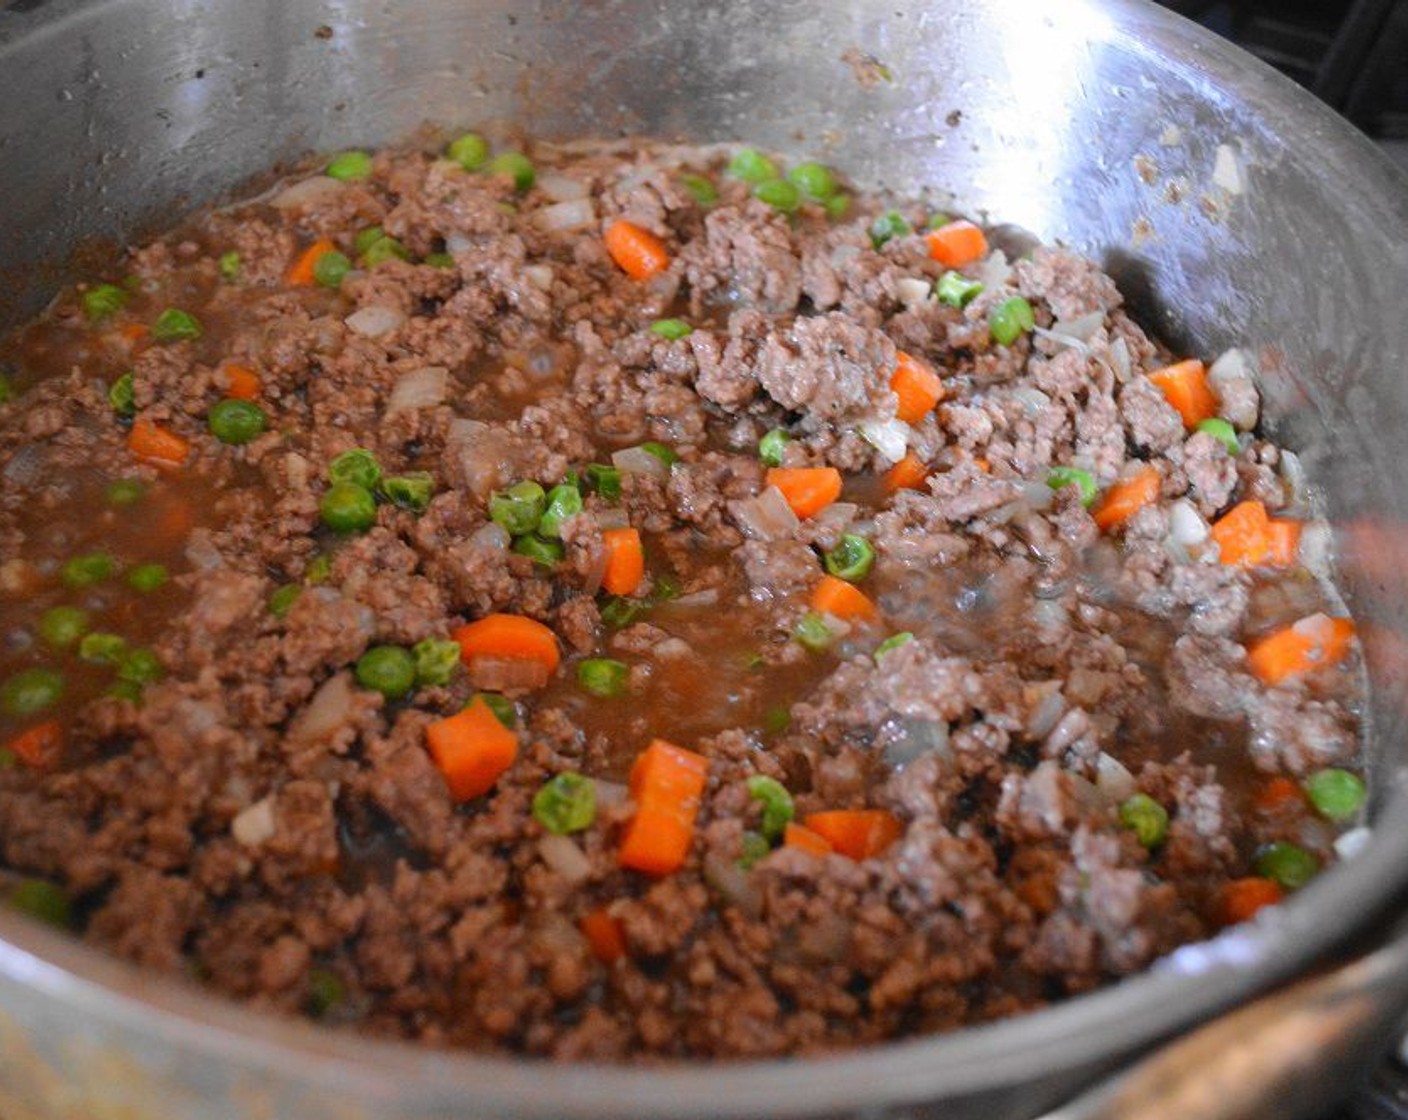 step 3 Heat the Canola Oil (1 dash) in a large skillet over medium high heat. Brown the Ground Beef (1.5 lb) in it while you break it up with a spoon, which should take about 4-5 minutes. Drain off any excess grease.